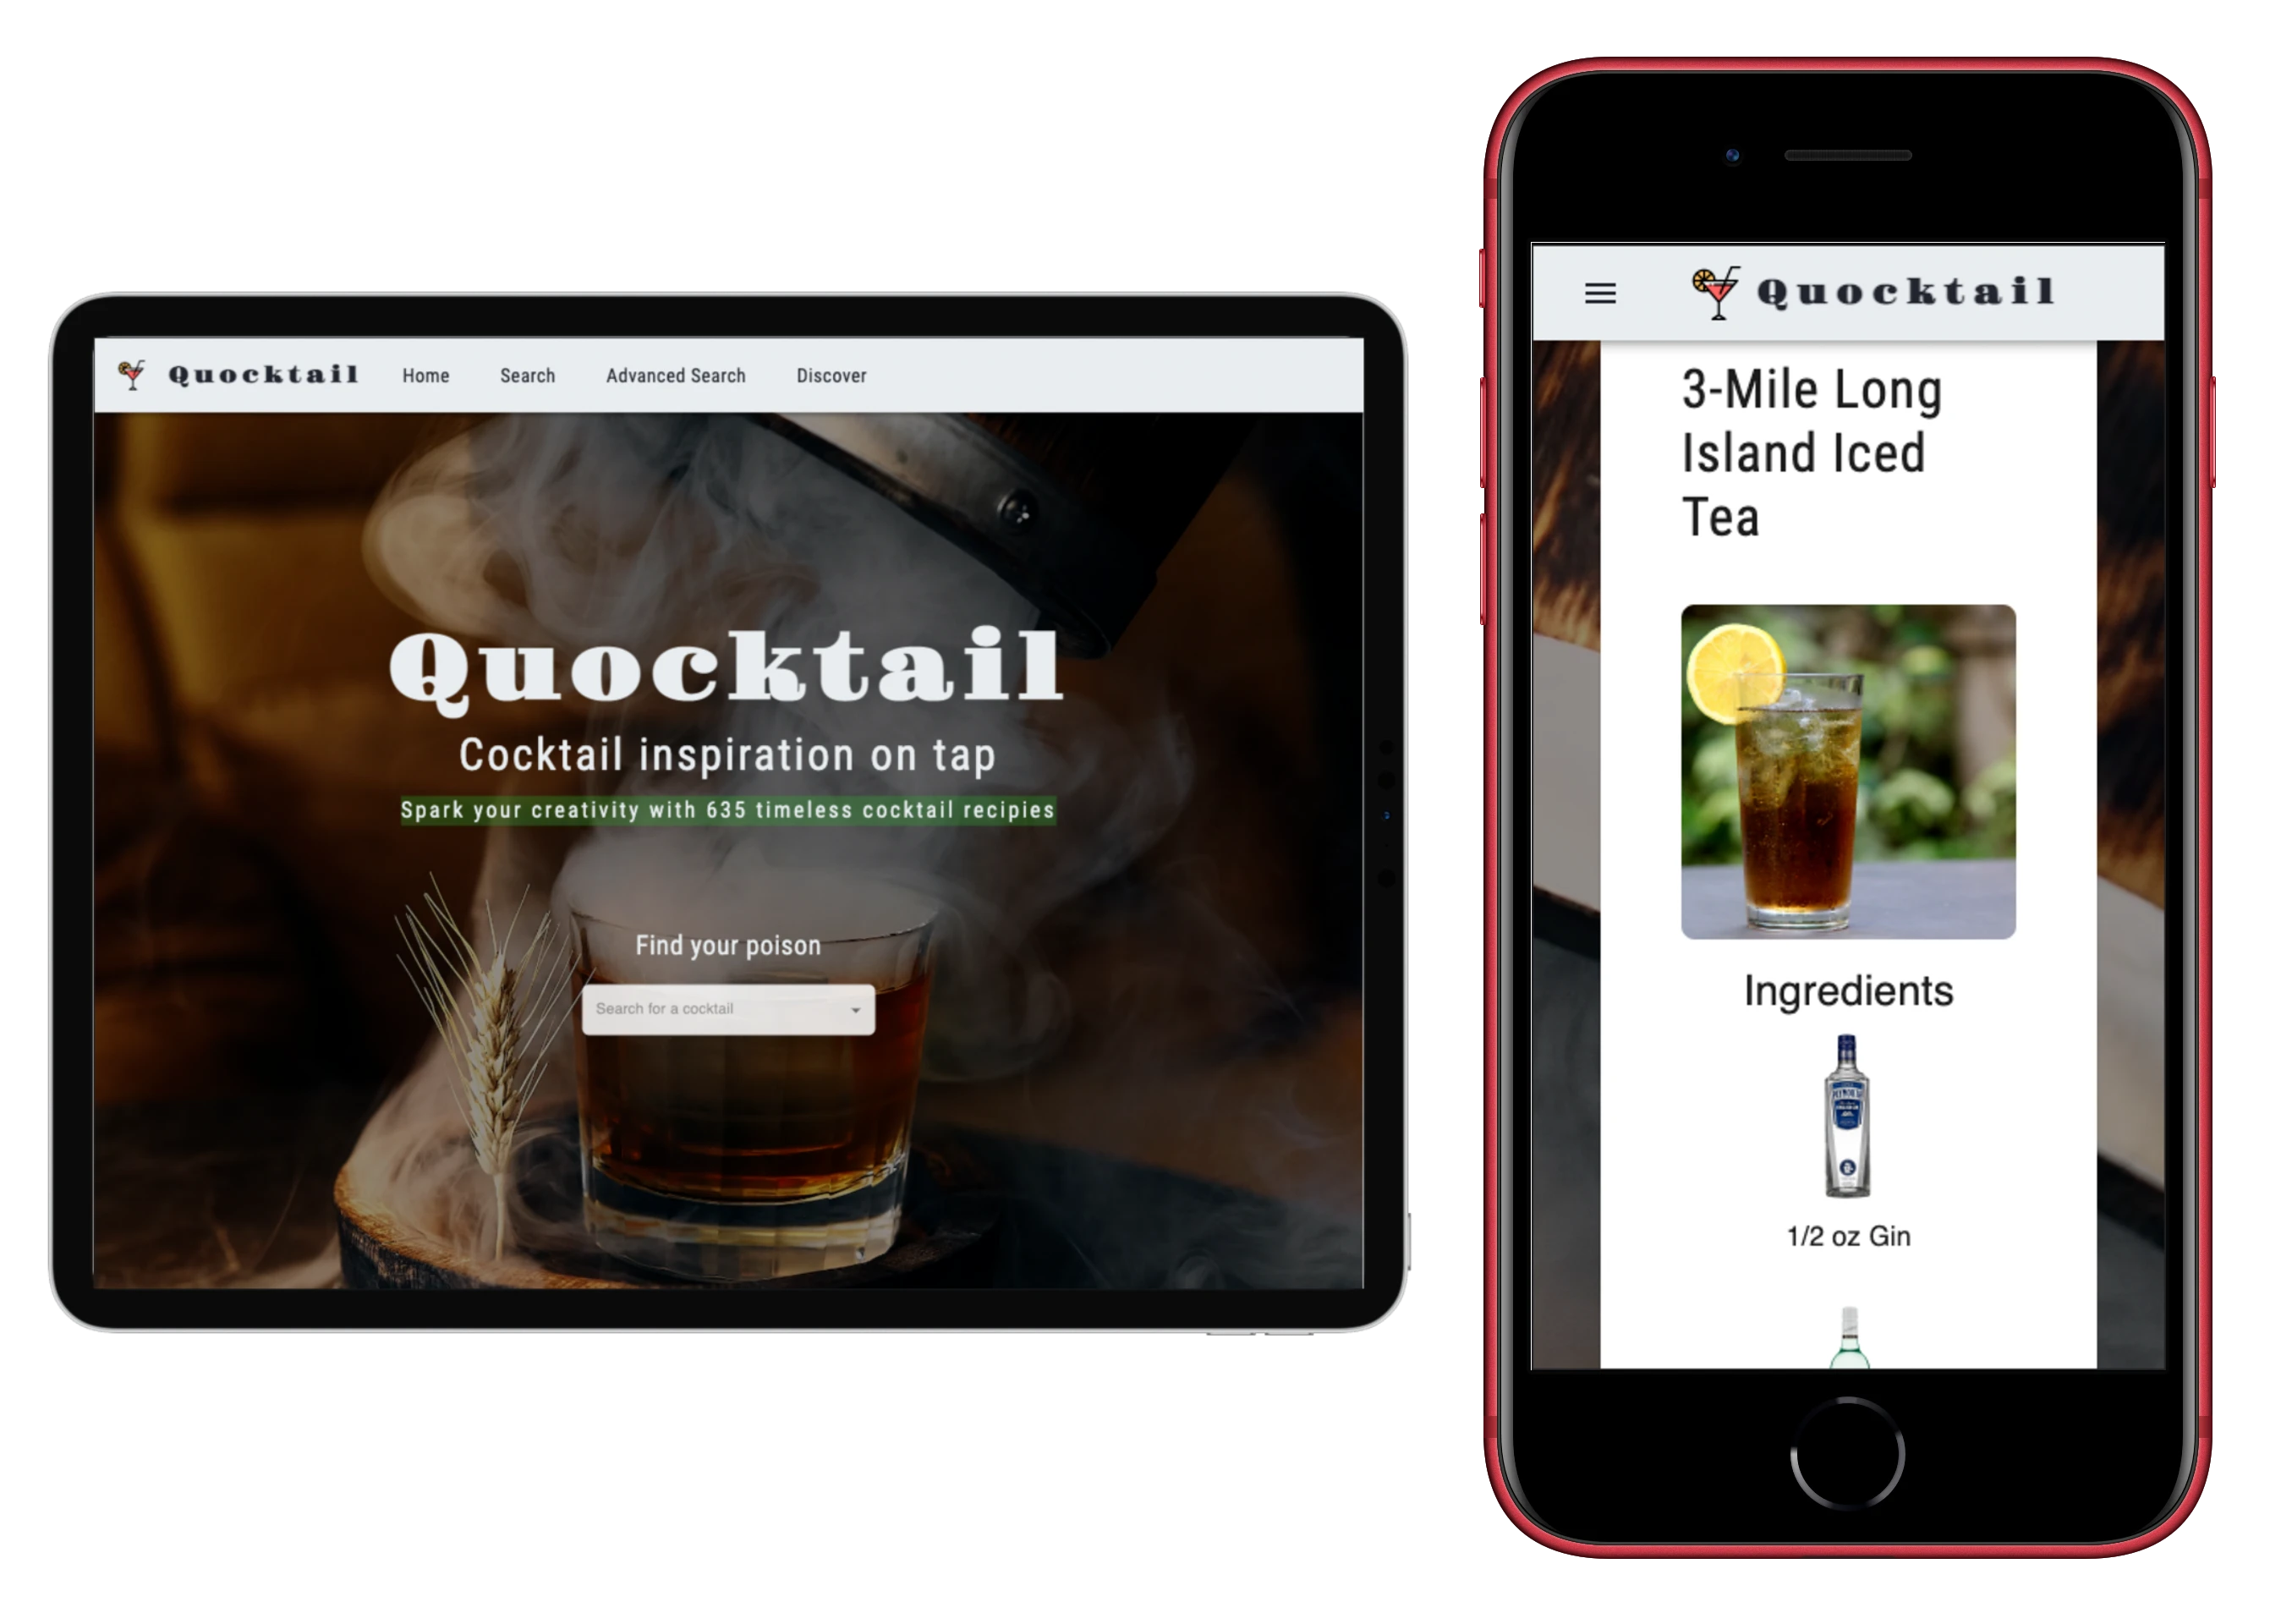 Quocktail as displayed on iPad and iPhone